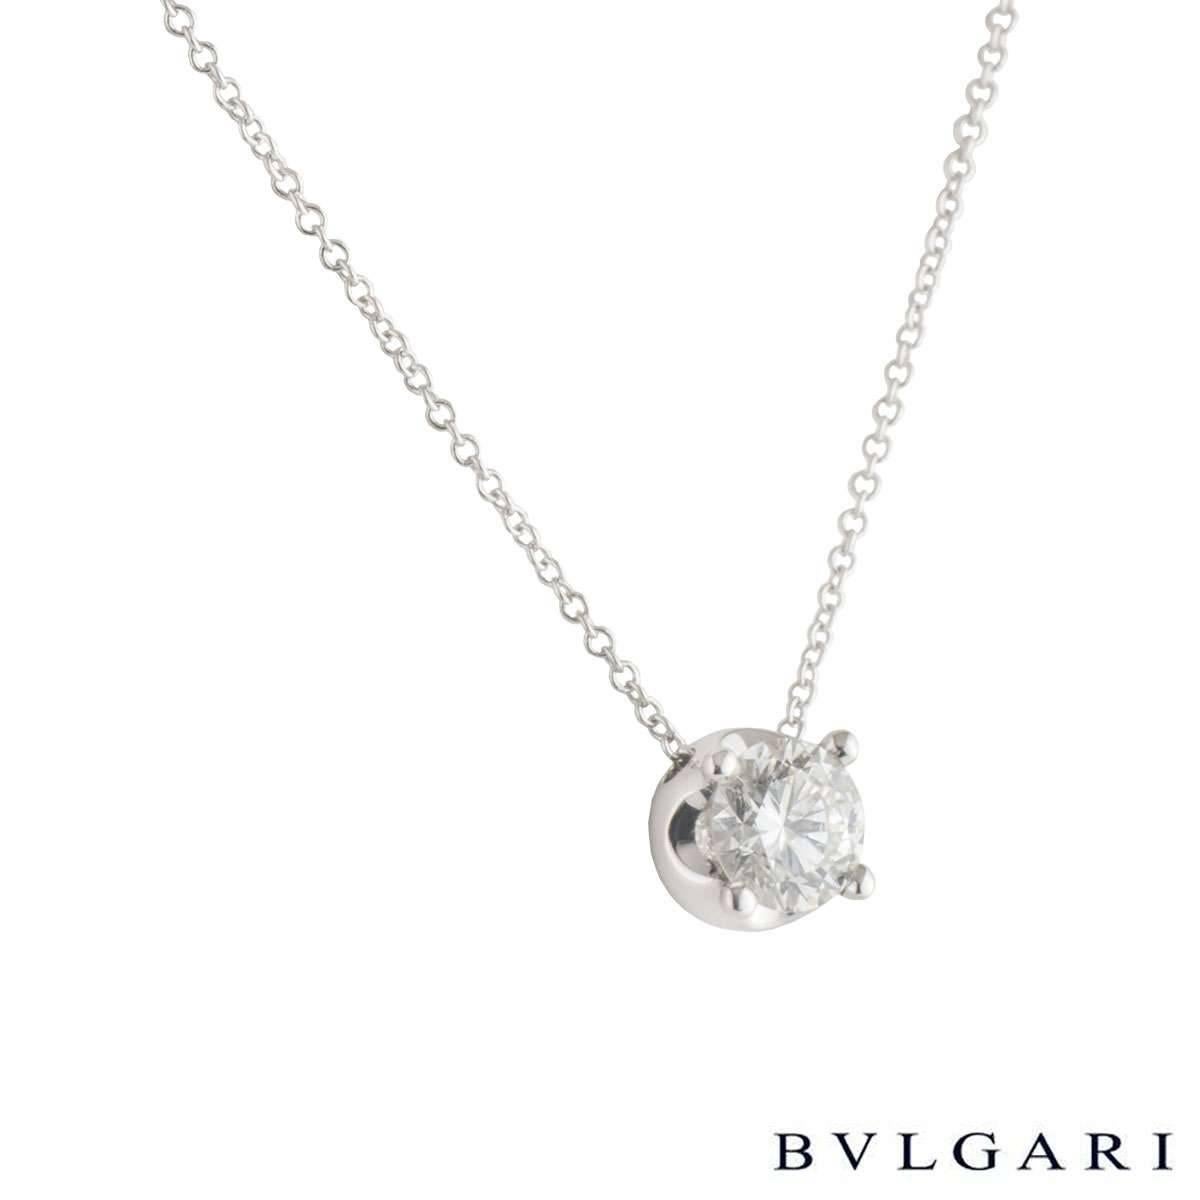 A stunning 18k white gold Bvlgari diamond necklace from the corona collection. The necklace comprises of a round brilliant cut diamond in a raised four claw setting, with a weight of 1.02ct, H colour and IF clarity. The diamond scores an excellent